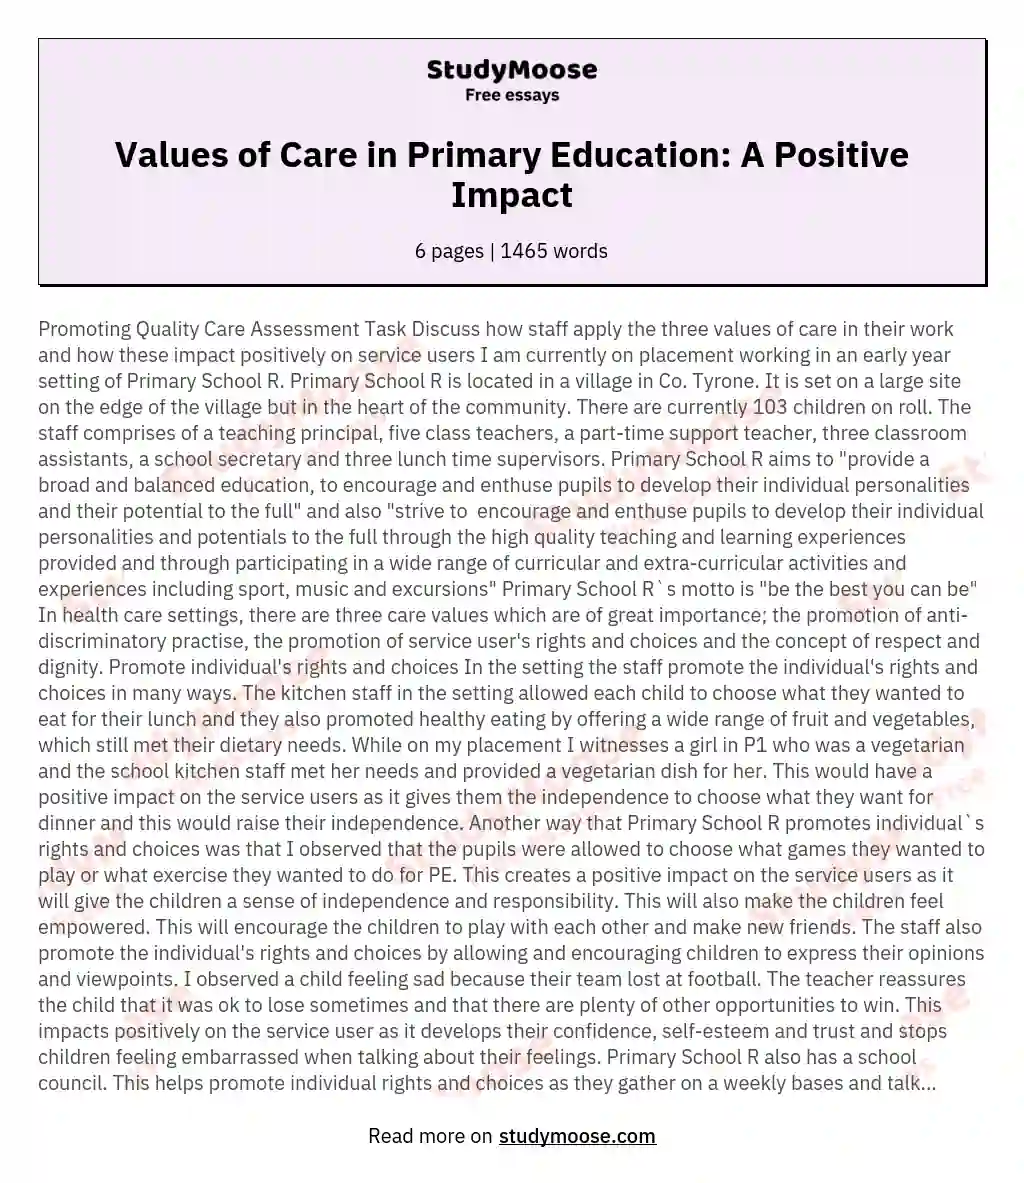 Values of Care in Primary Education: A Positive Impact essay